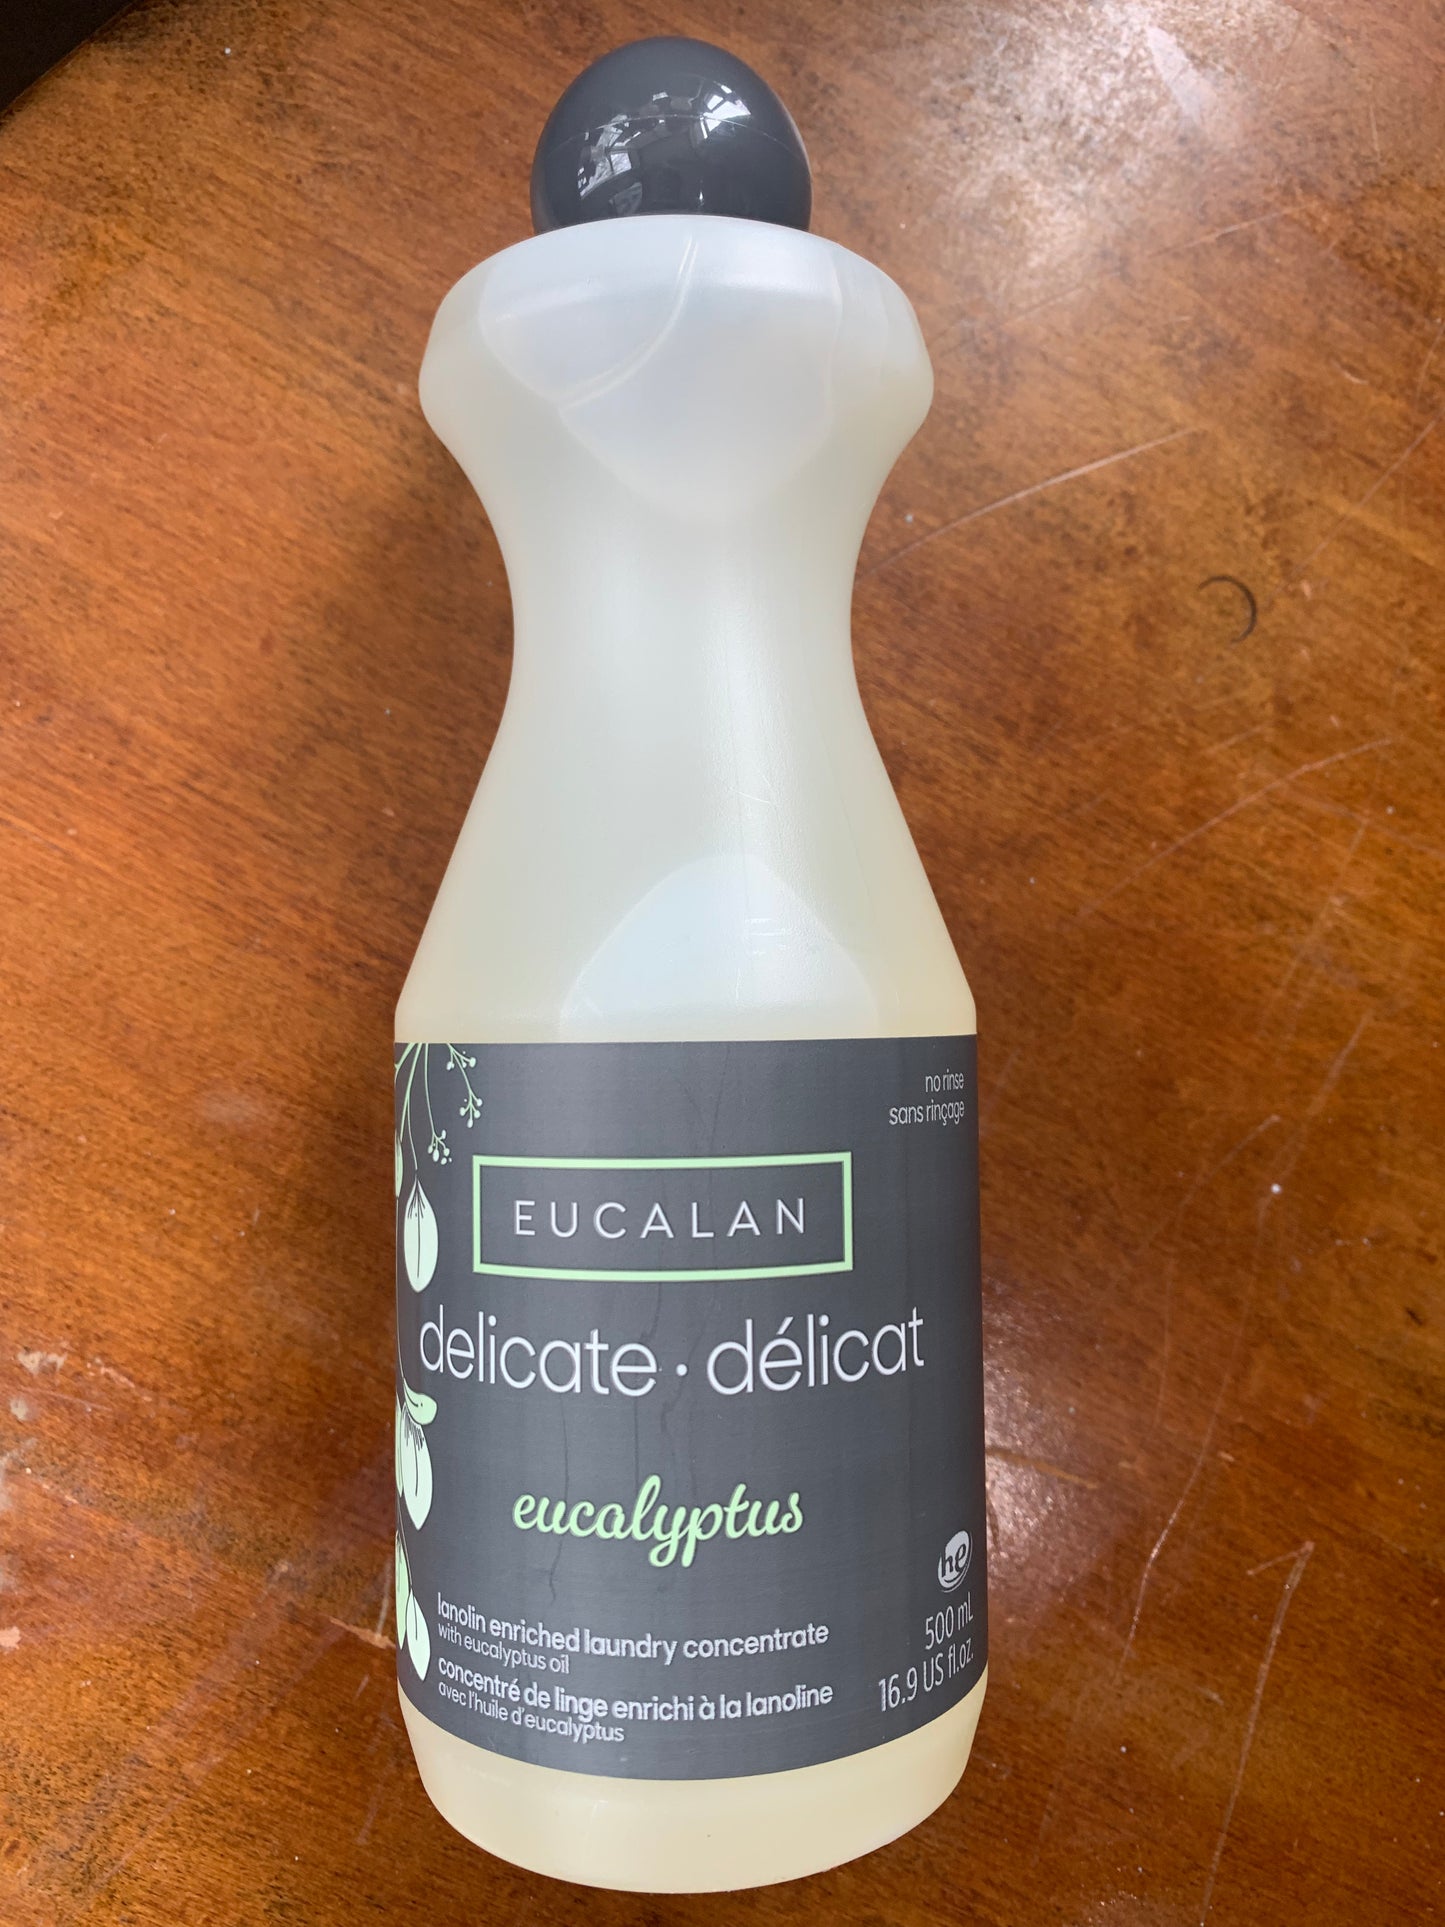 Eucalan Delicate - Lanolin enriched laundry concentrate – ALikelyYarn